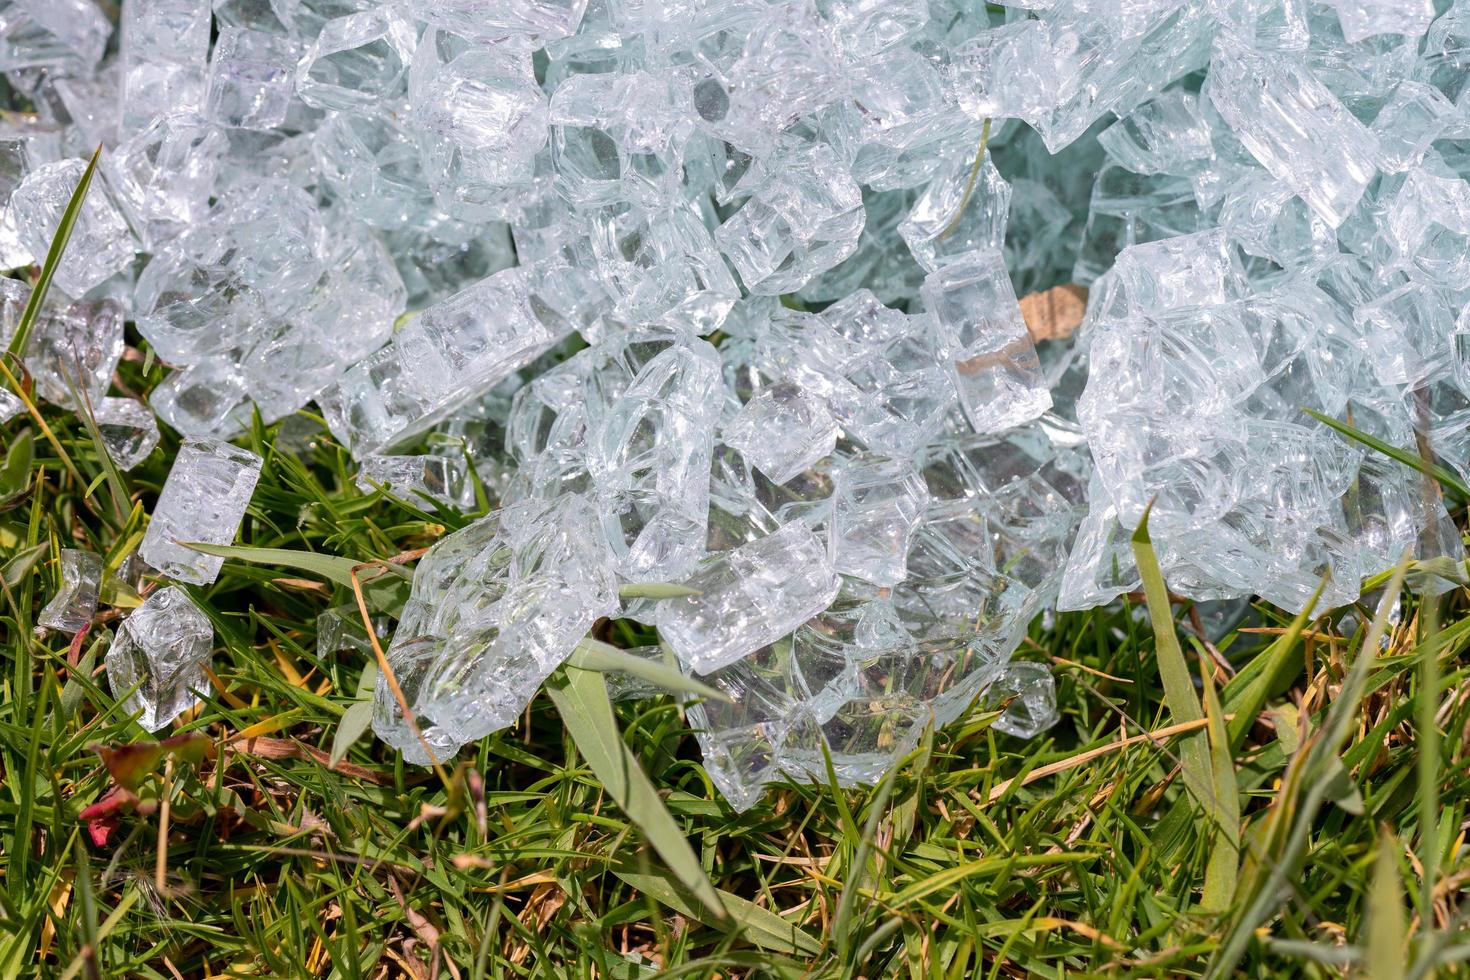 Shattered Glass on the ground photo